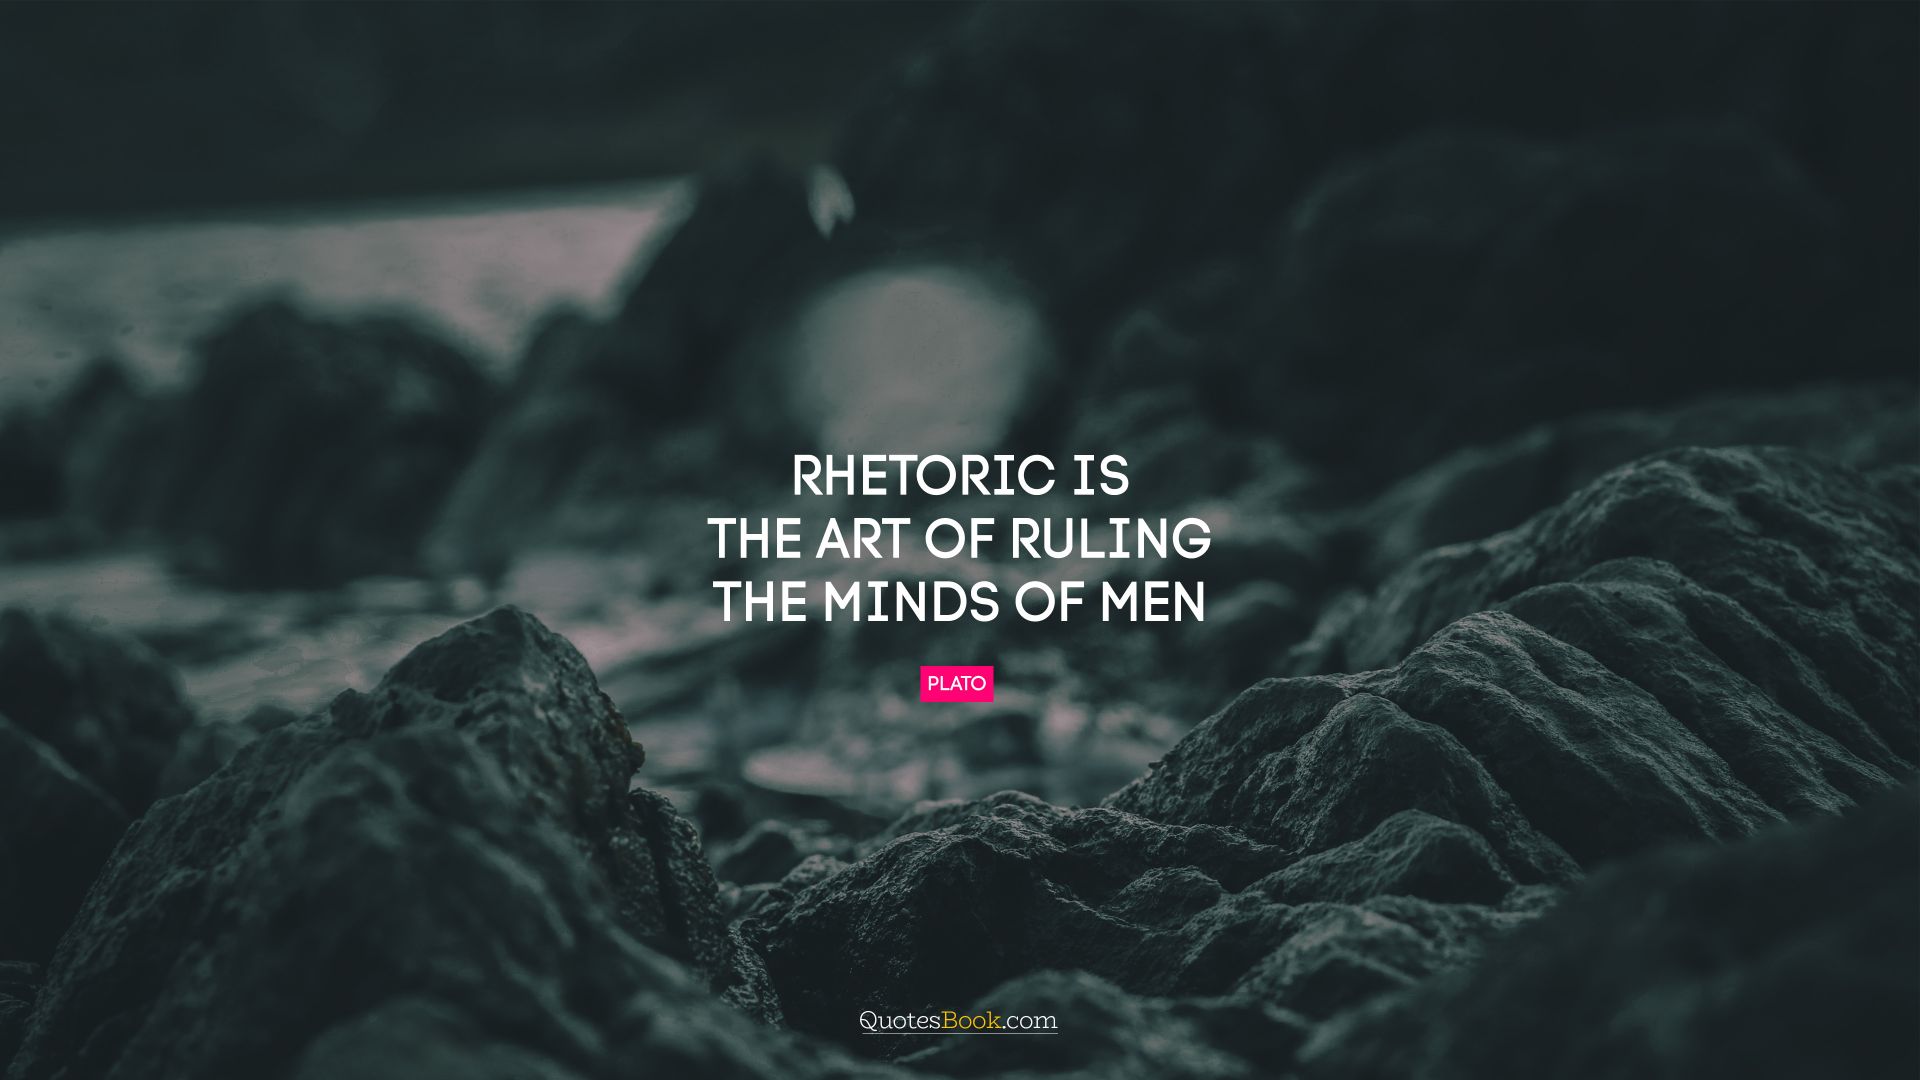 Rhetoric is the art of ruling the minds of men. - Quote by Plato